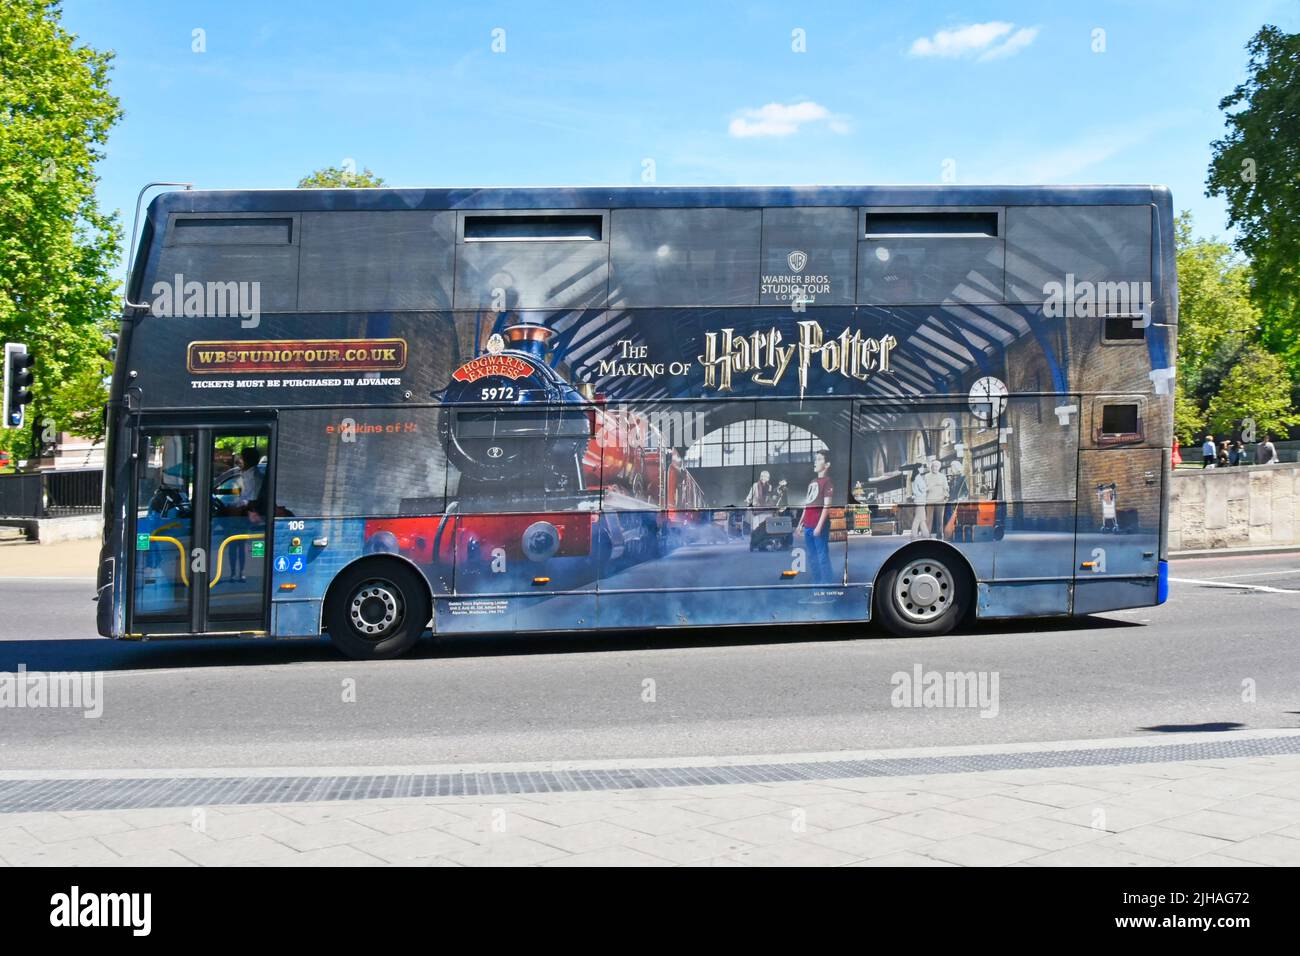 Shuttle tour bus running passenger route for enthusiasts from Victoria to Warner Bros ‘Harry Potter Studio Tour’ experience at Watford England UK Stock Photo